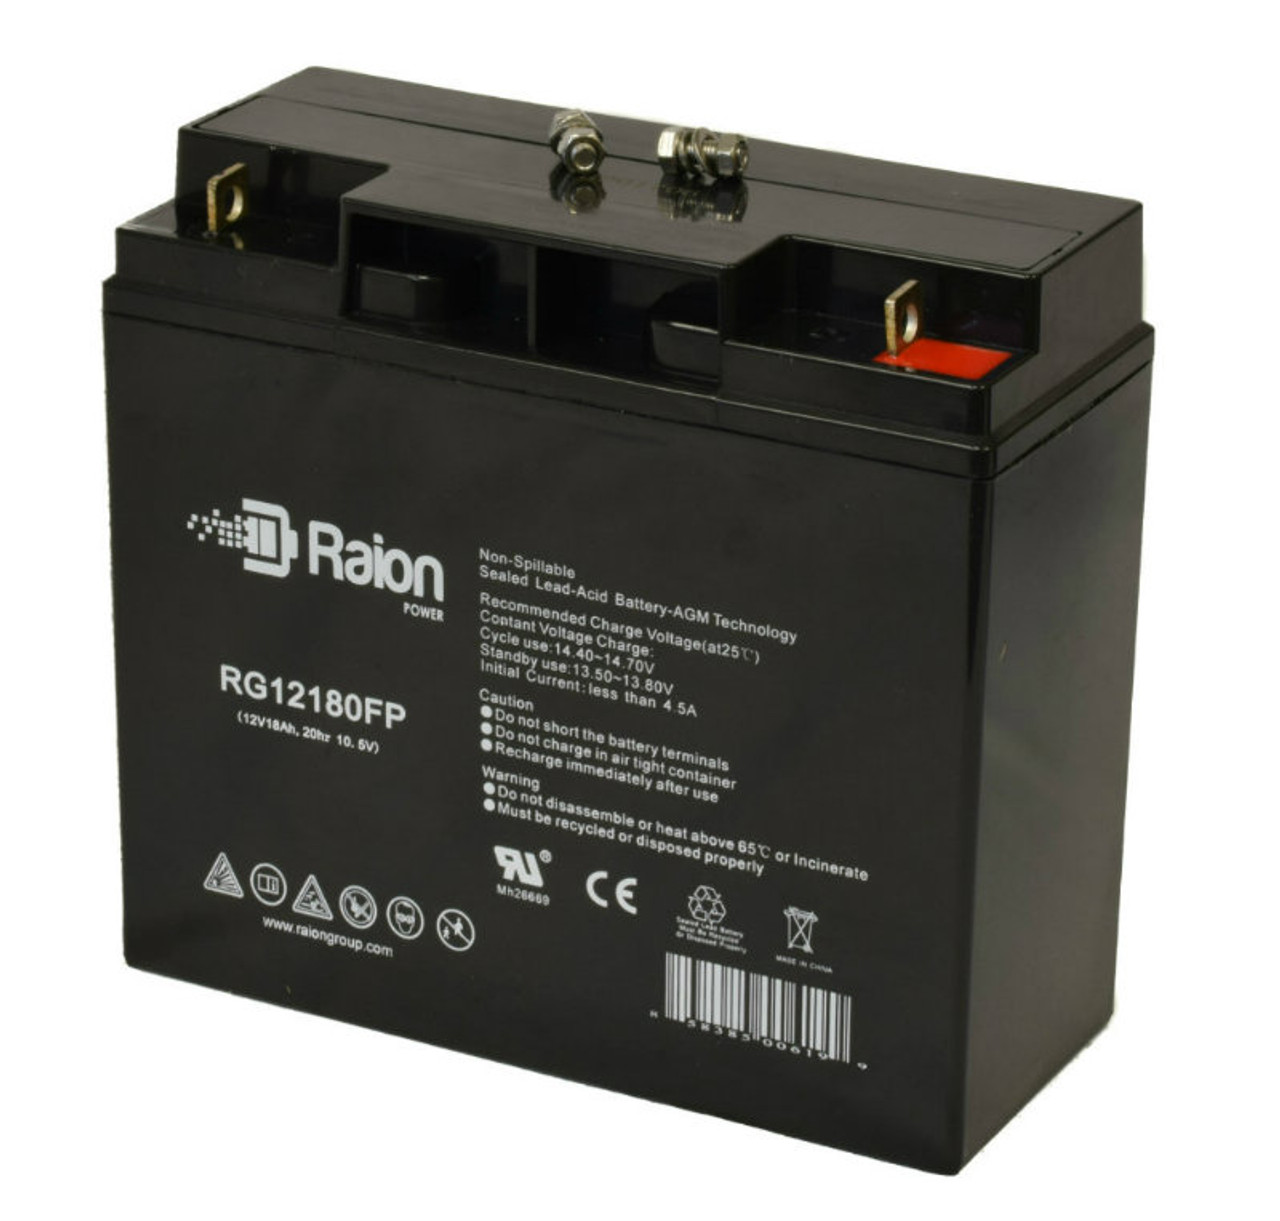 Raion Power Replacement 12V 18Ah Battery for Zonne Energy FP12170 - 1 Pack